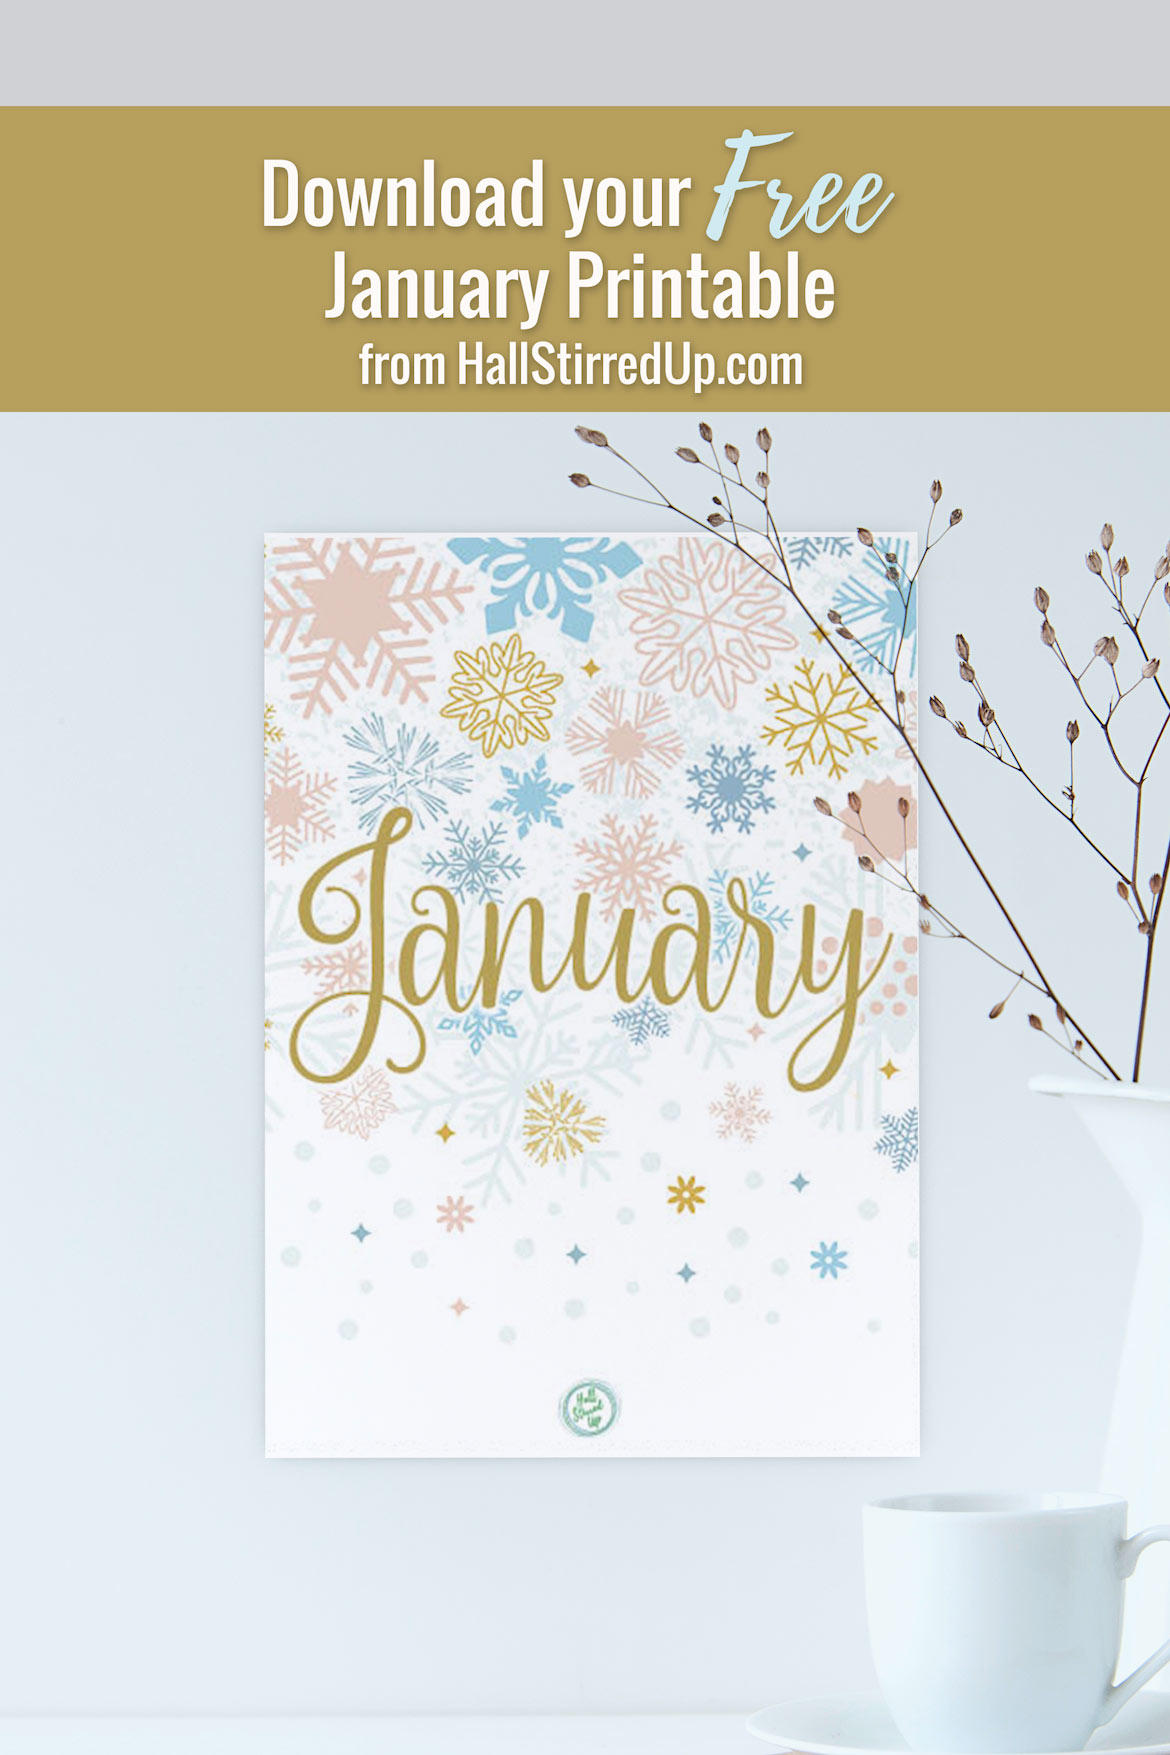 A new month a new year and a new January free printable